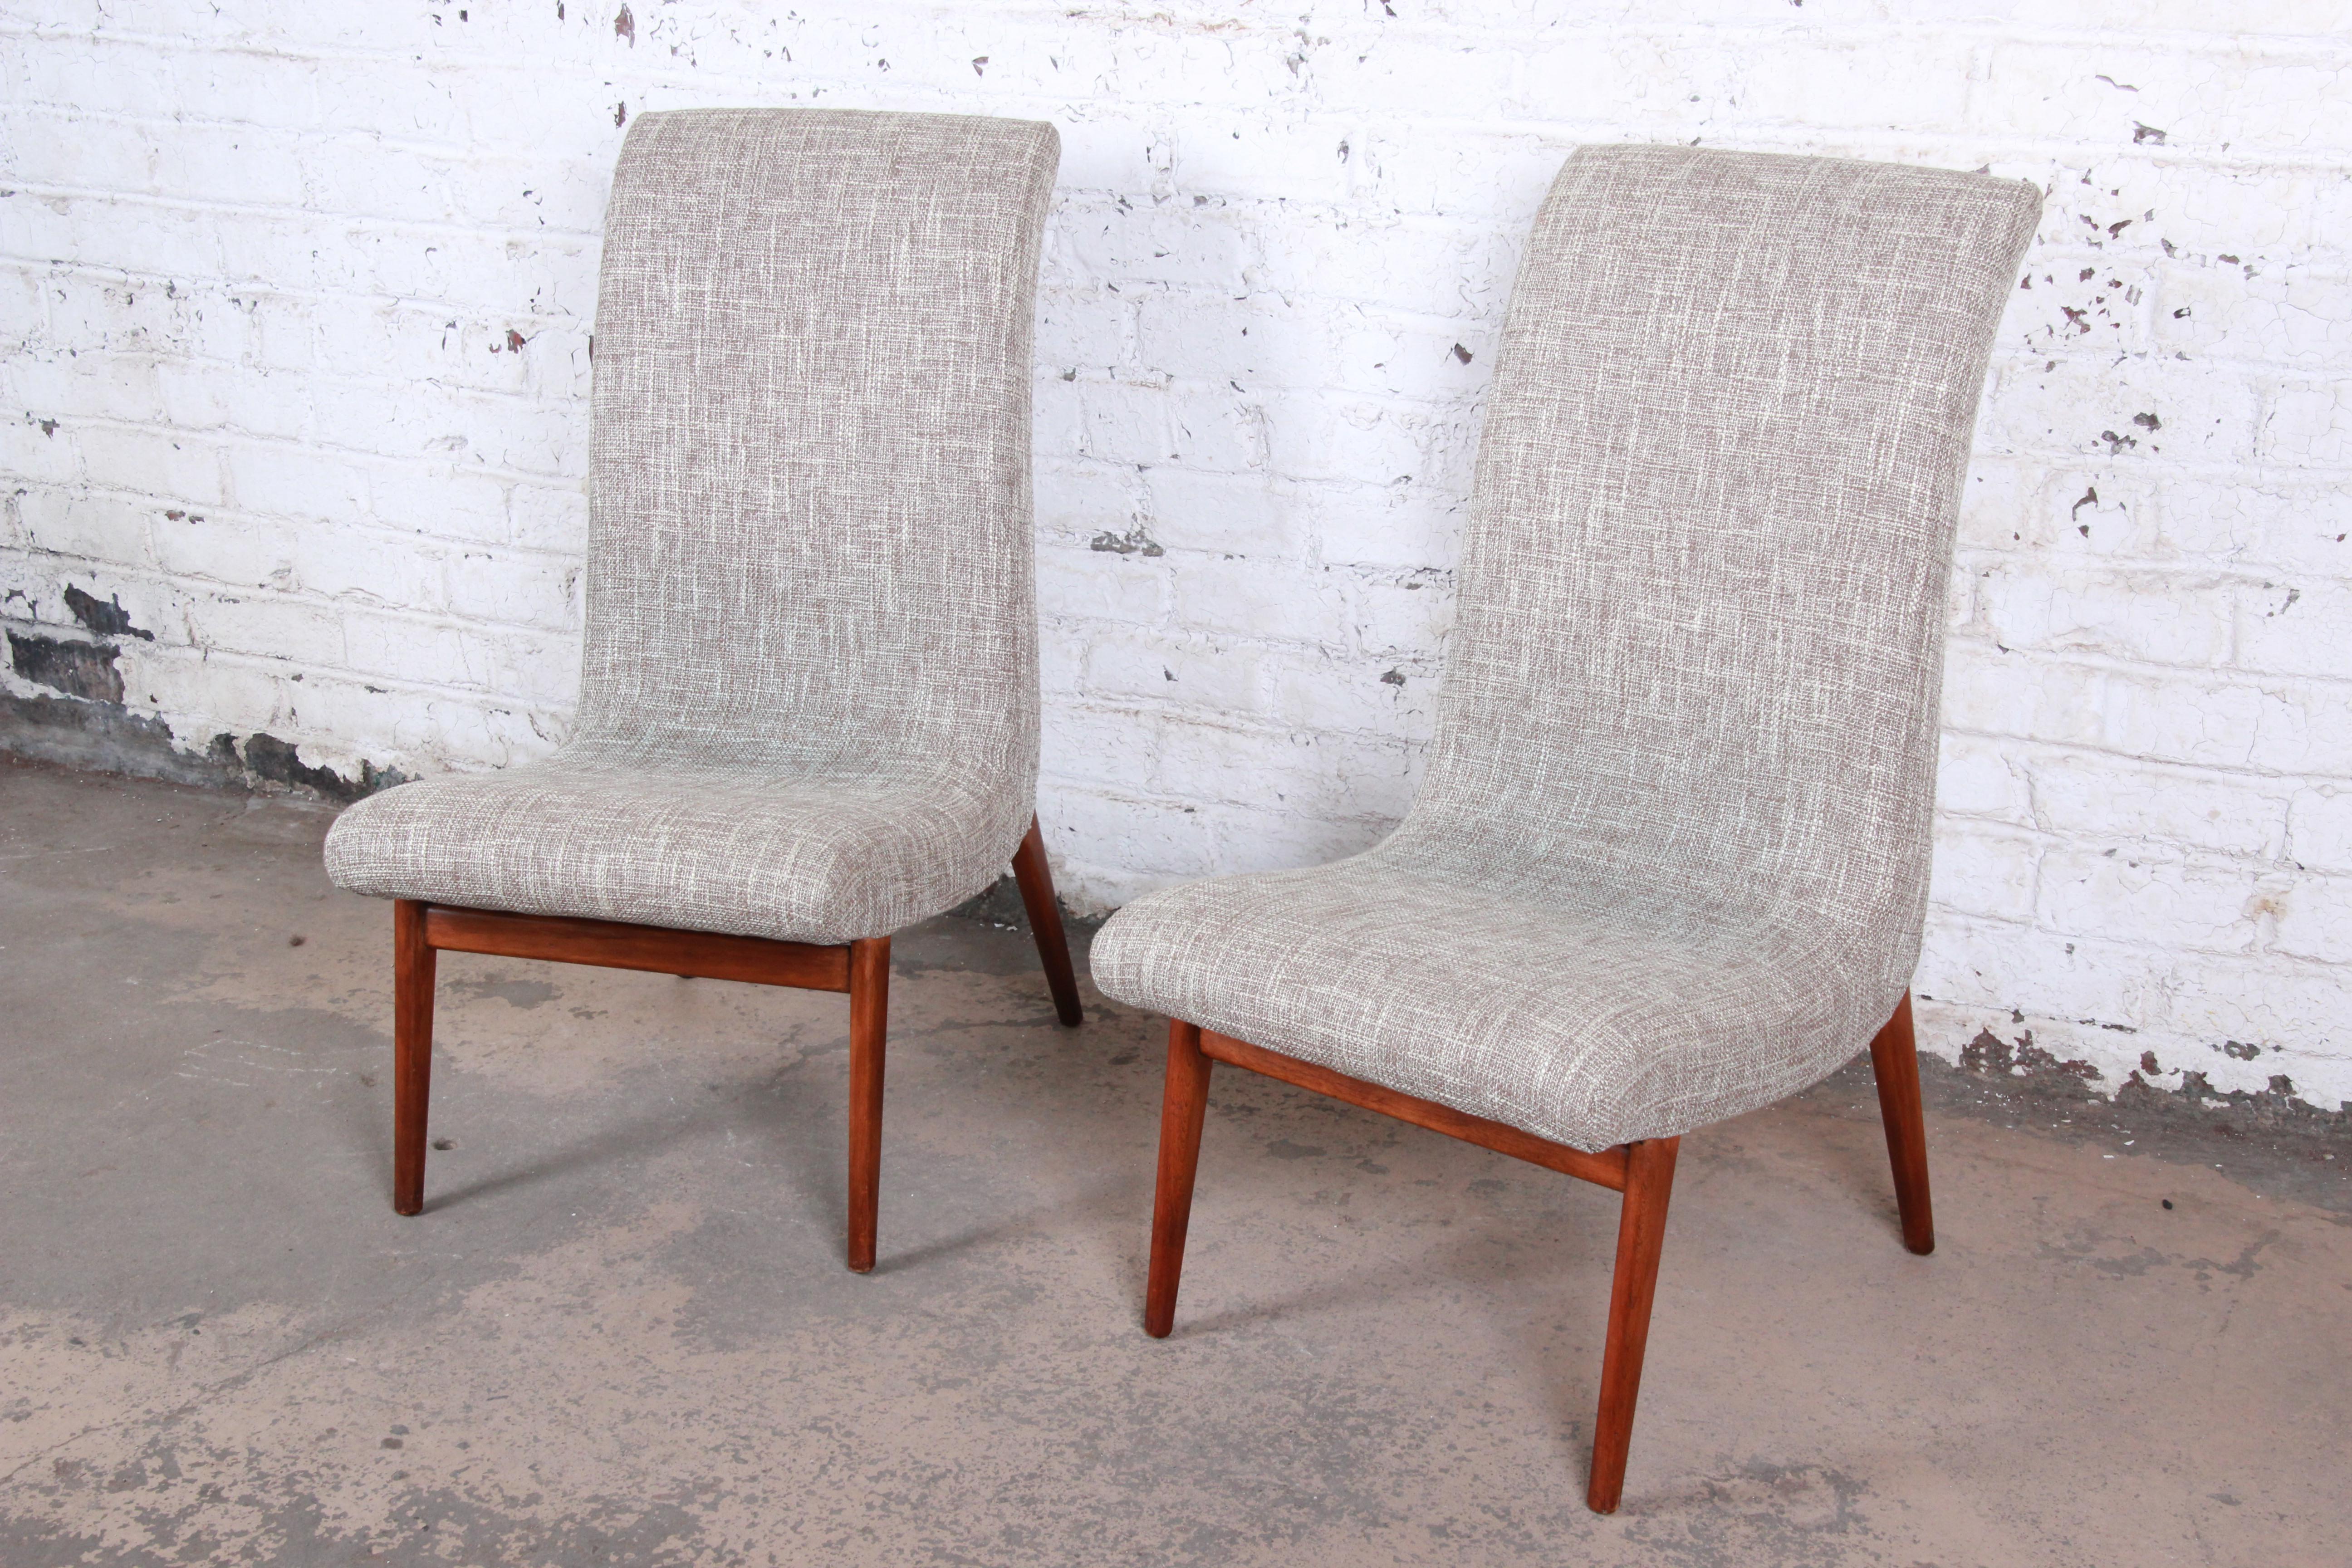 American Norman Bel Geddes Mid-Century Modern Slipper Chairs, Newly Reupholstered